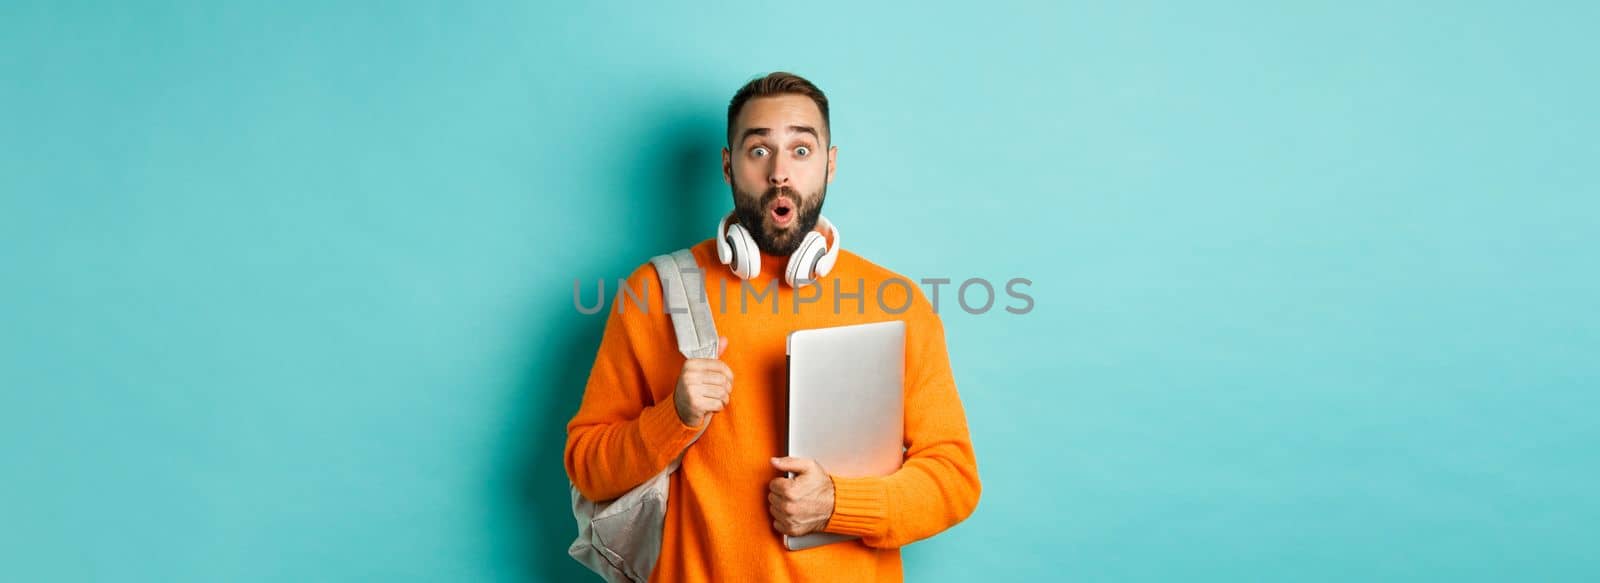 Happy man with backpack and headphones, holding laptop and smiling, looking surprised, standing over turquoise background.